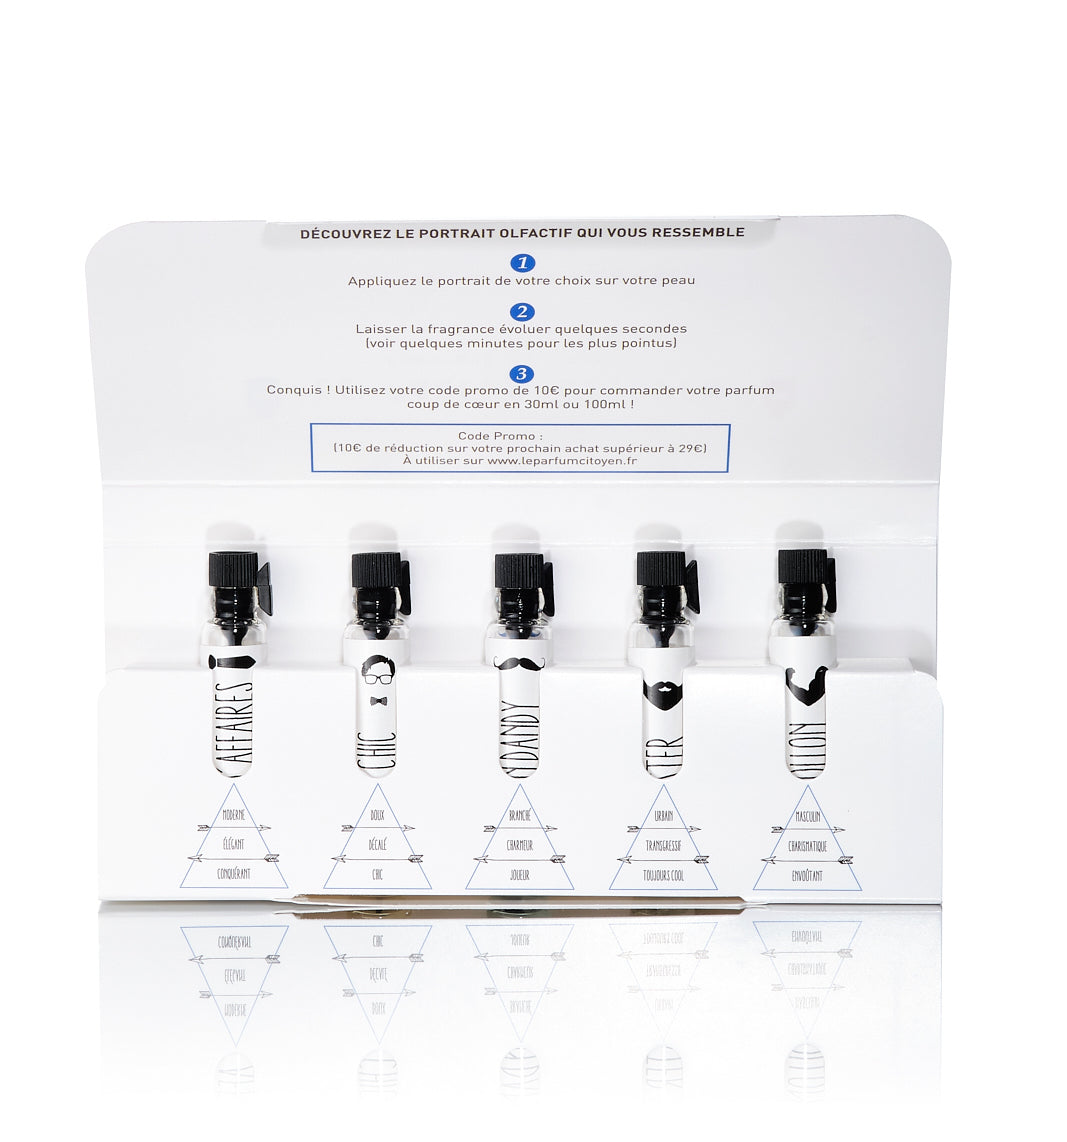 DISCOVERY KIT FOR HIM - 5 perfume samples x 2ml